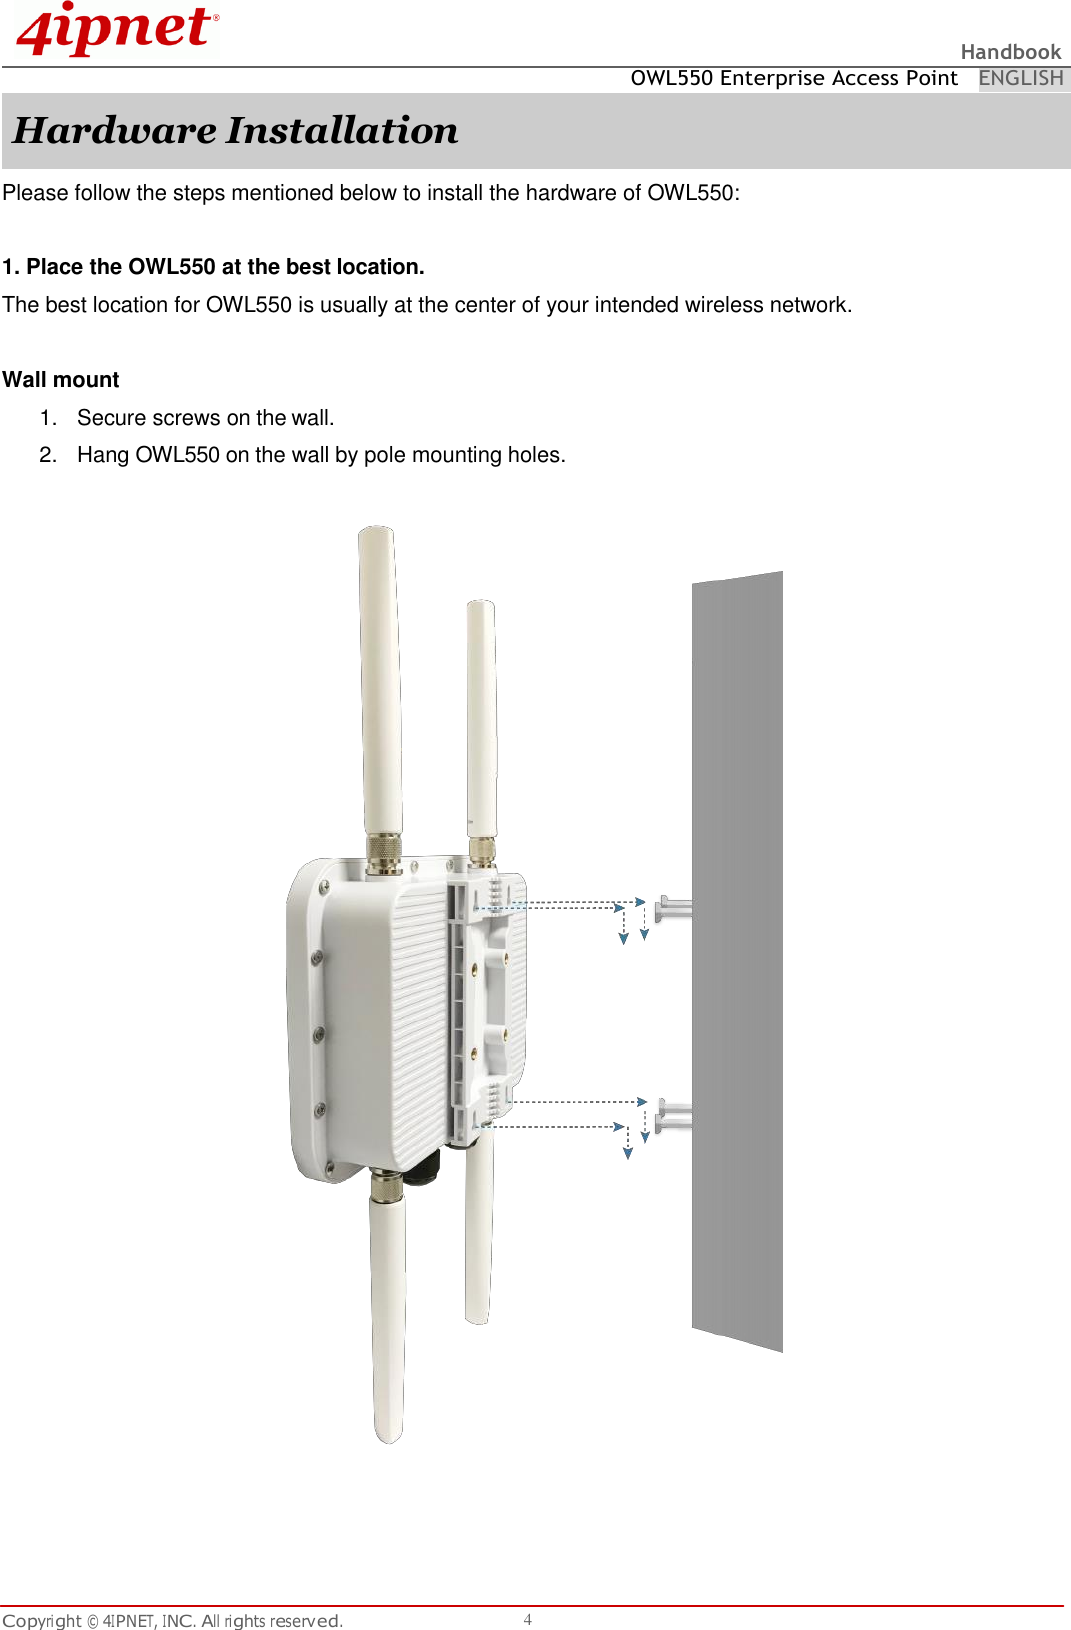 Copyright © 4IPNET, INC. All rights reserved. 4 Handbook   OWL550 Enterprise Access Point ENGLISH Hardware Installation Please follow the steps mentioned below to install the hardware of OWL550:  1. Place the OWL550 at the best location. The best location for OWL550 is usually at the center of your intended wireless network.  Wall mount 1.  Secure screws on the wall. 2.  Hang OWL550 on the wall by pole mounting holes.   